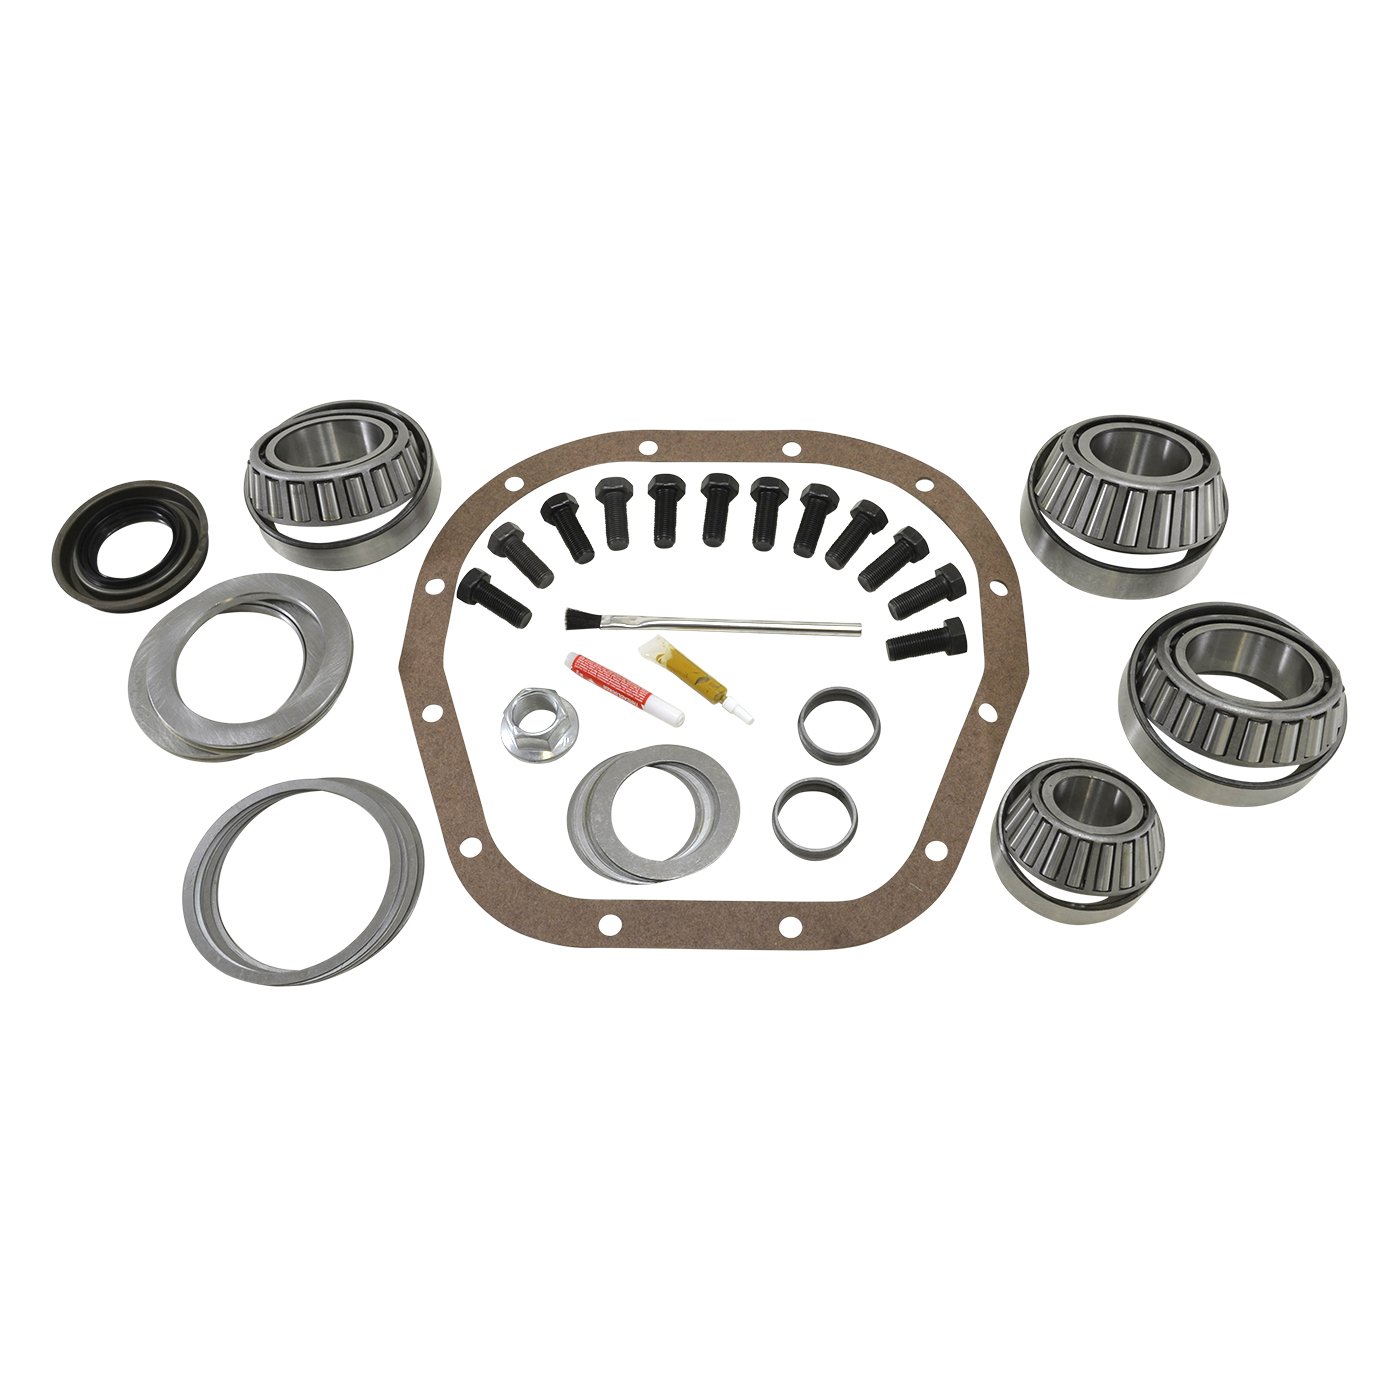 USA Standard ZK F10.25 Master Overhaul Kit, For The Ford 10.25 Differential